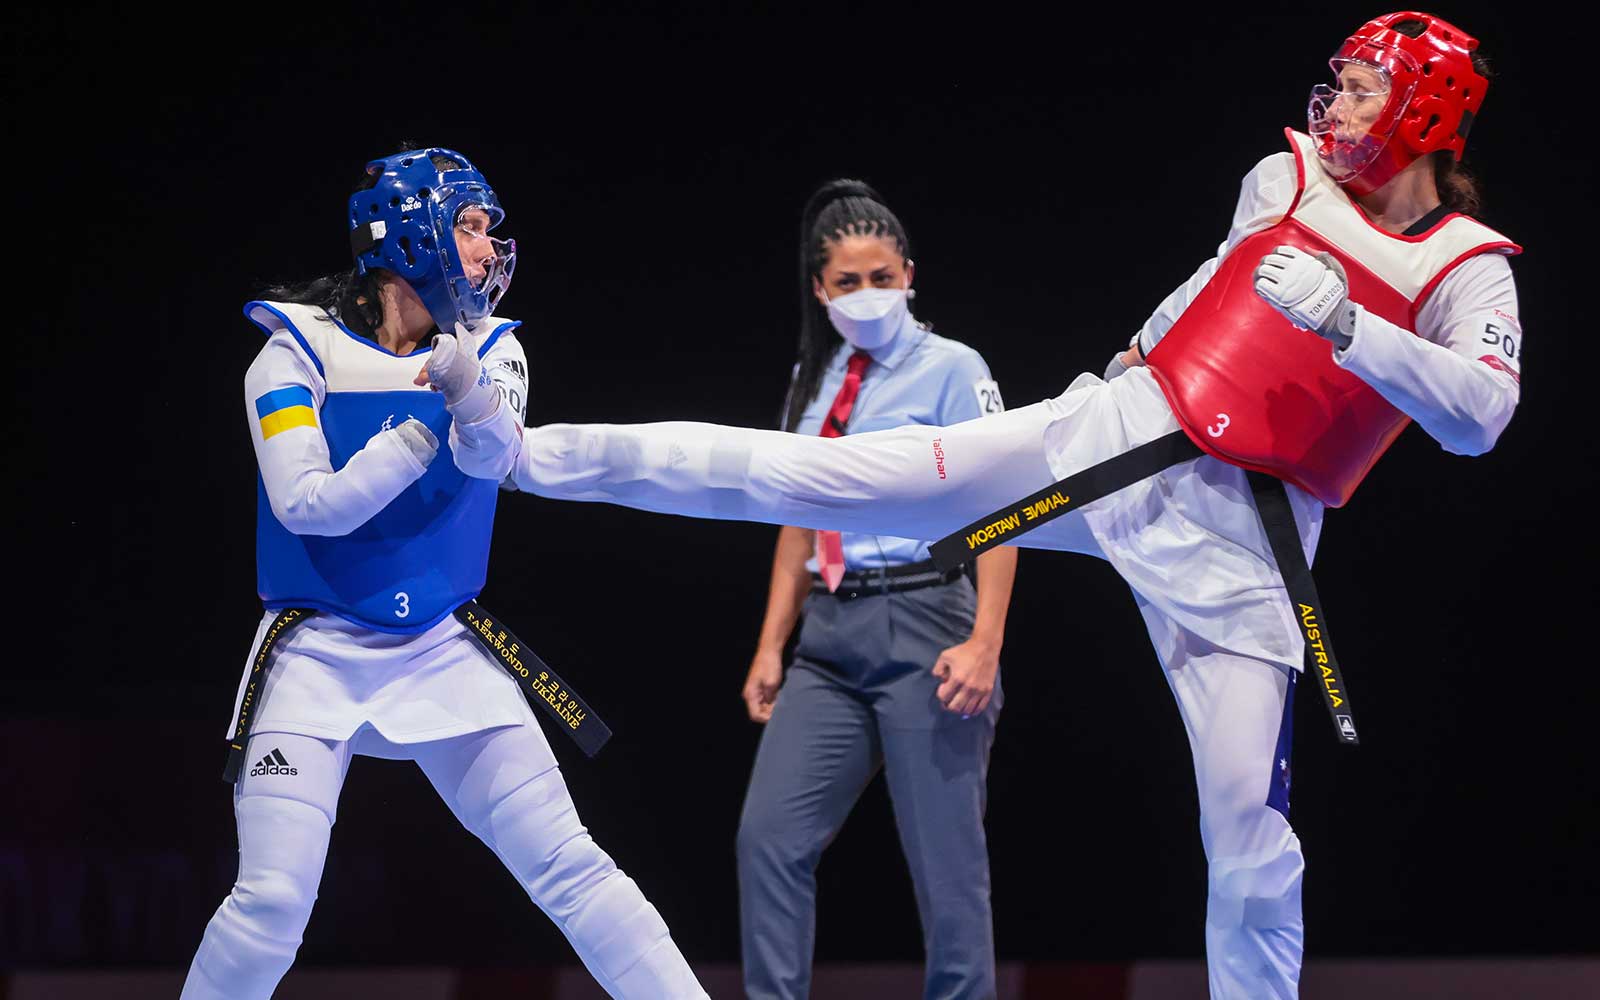 Taekwondo, Tennis And Now A New Challenge For Tokyo Medallist